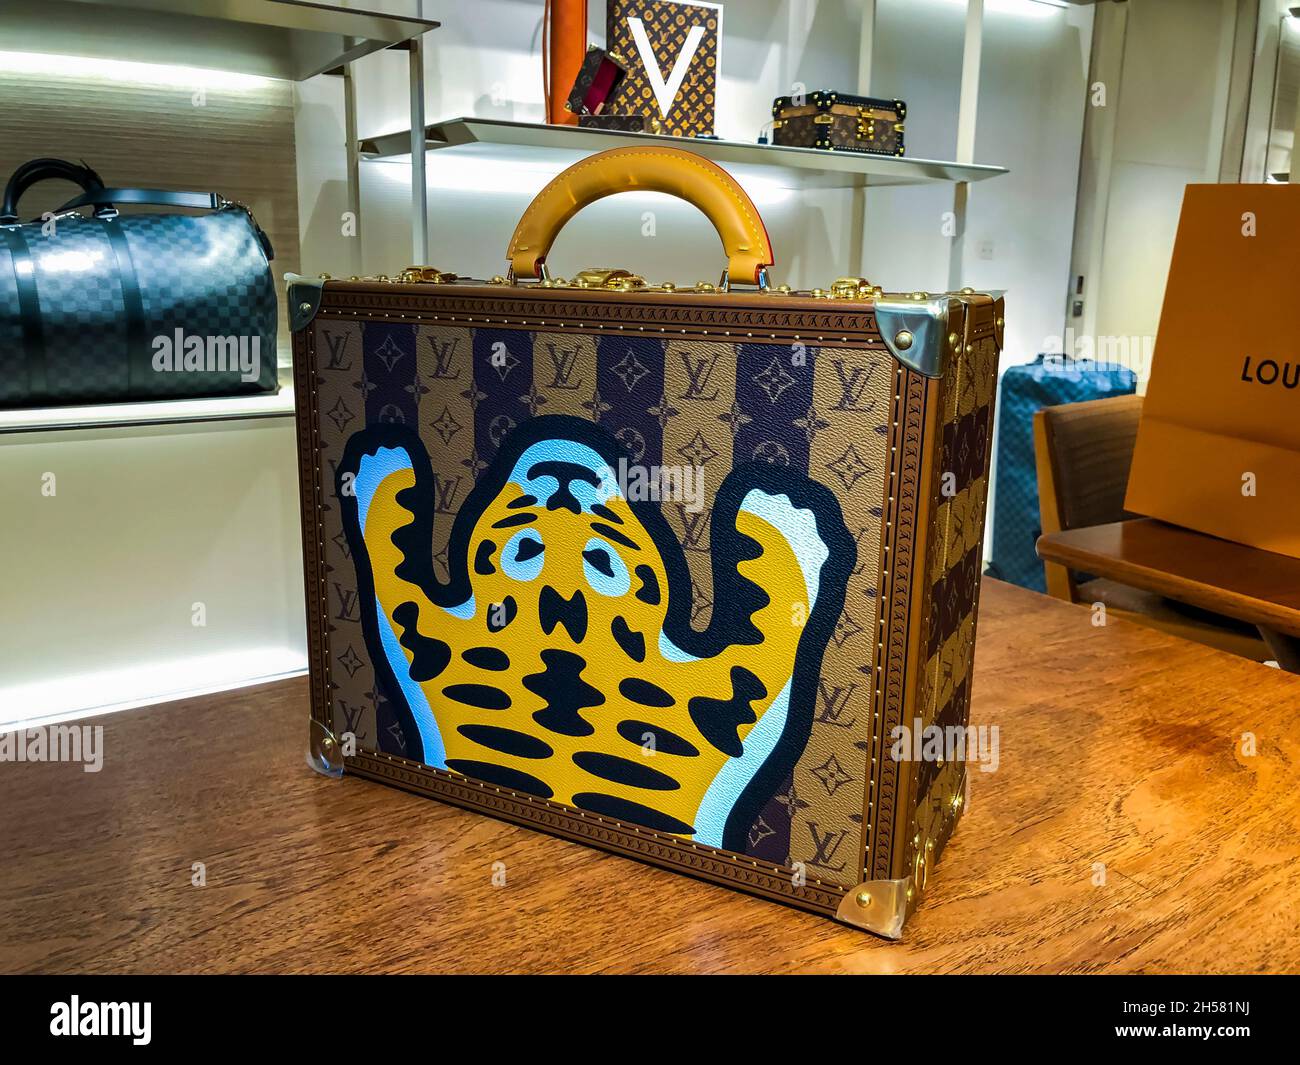 Paris, France, Luxury Consumer Goods on Display inside Louis Vuitton Luxury Clothing Store, louis vuitton bags, Rich Products luggage Stock Photo